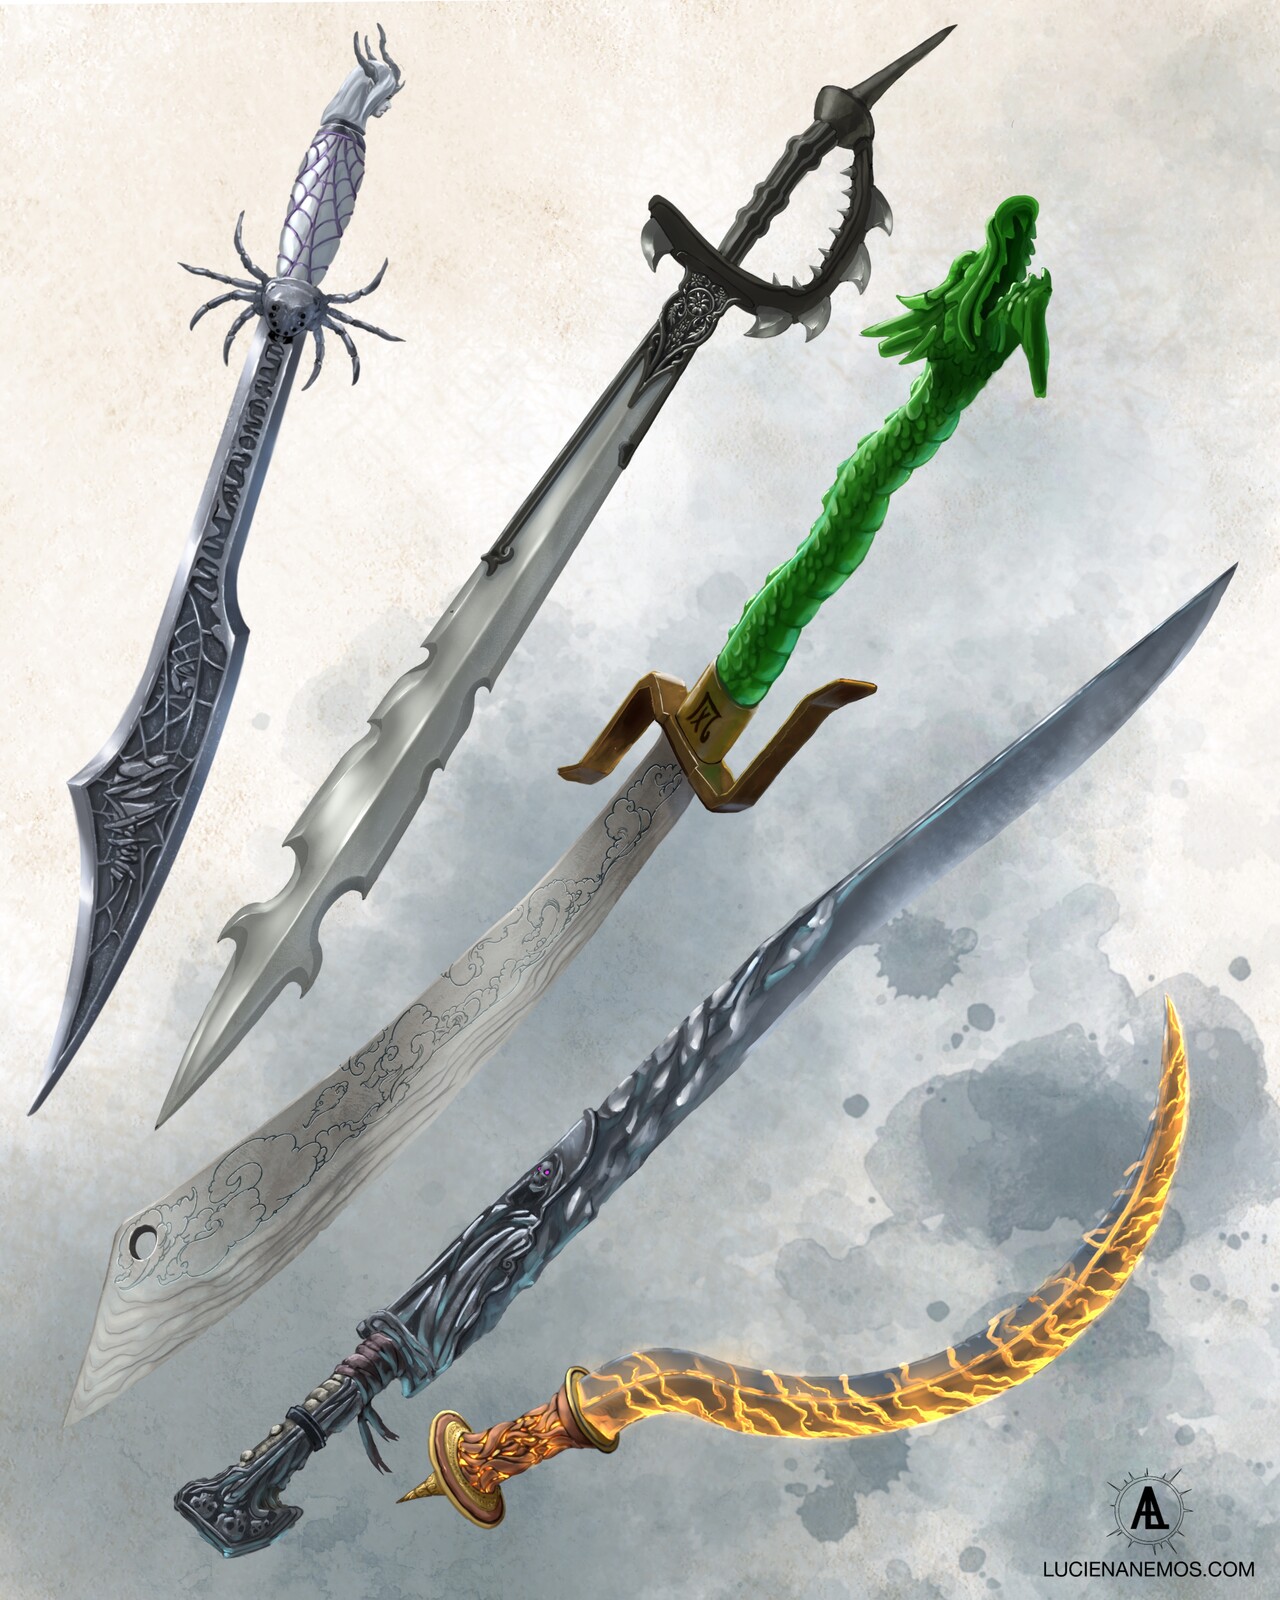 Spider sword. Lord of Pain. Wind Dragon. Deathblade. Hellfire Twin.